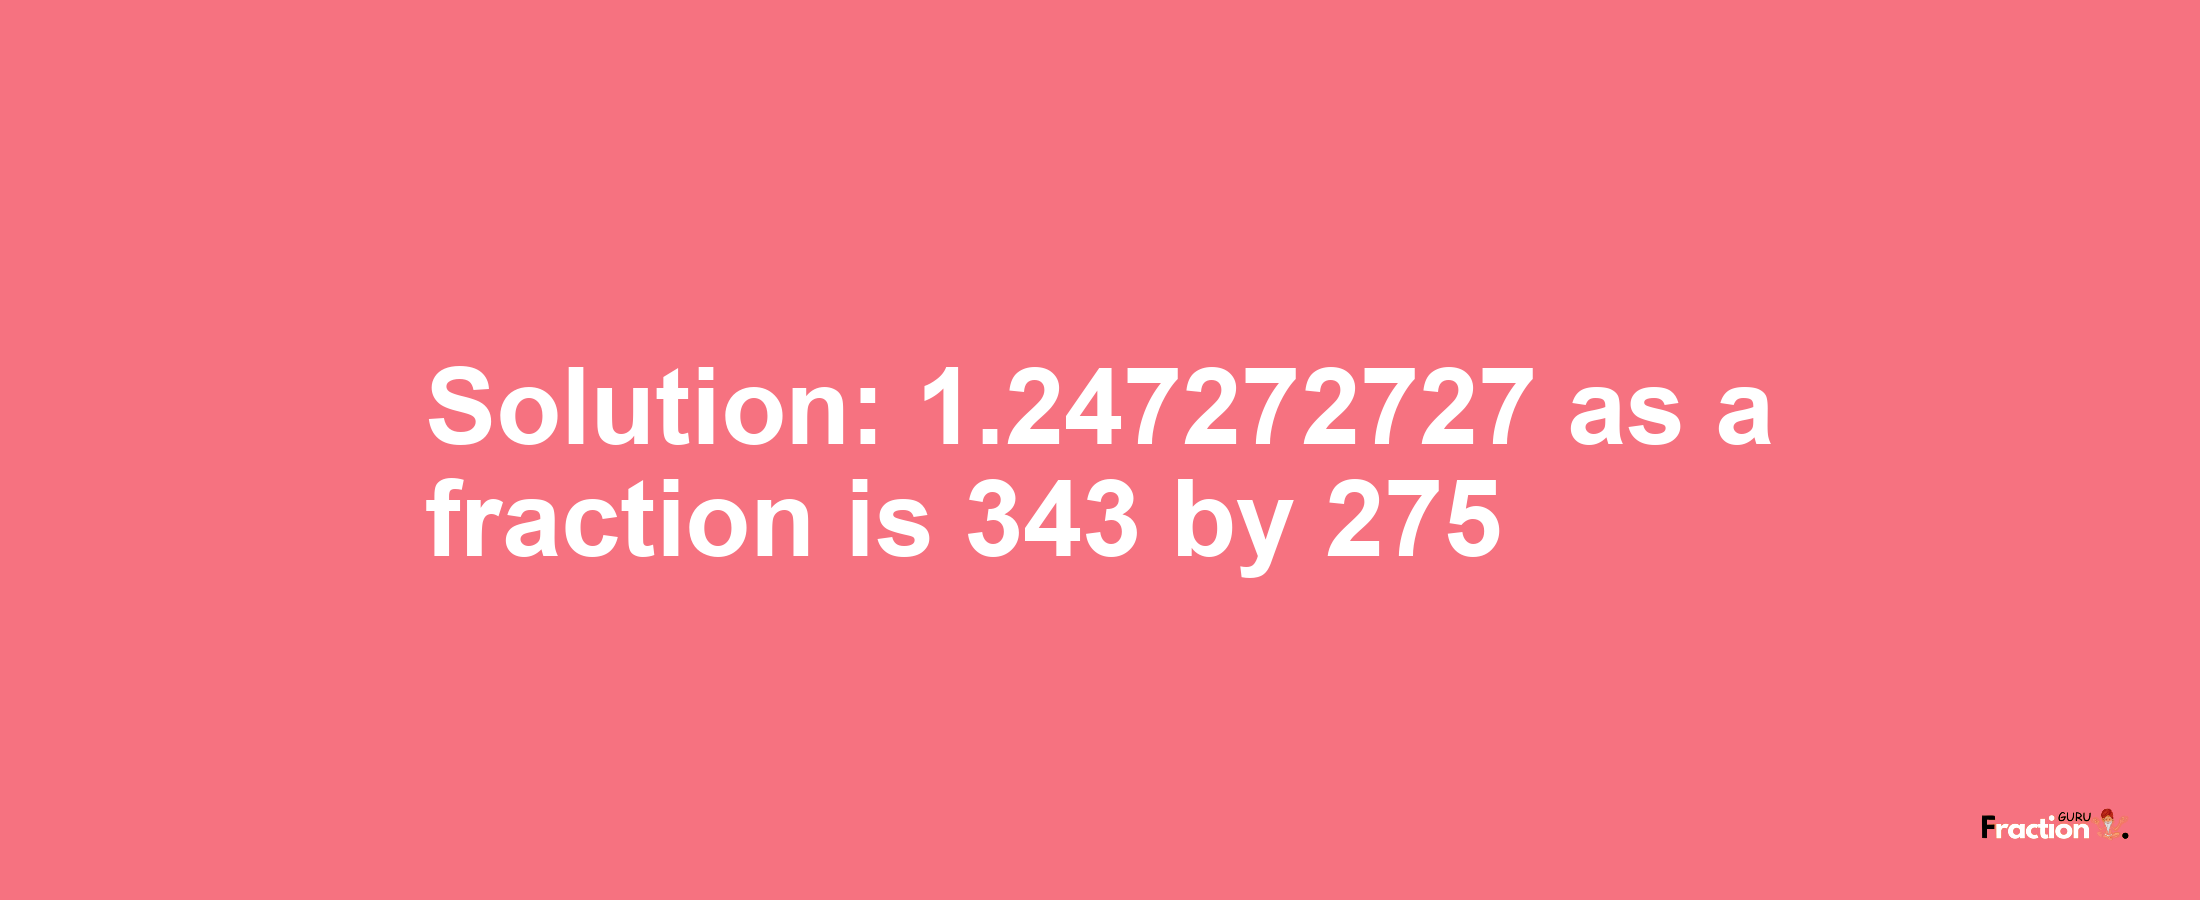 Solution:1.247272727 as a fraction is 343/275